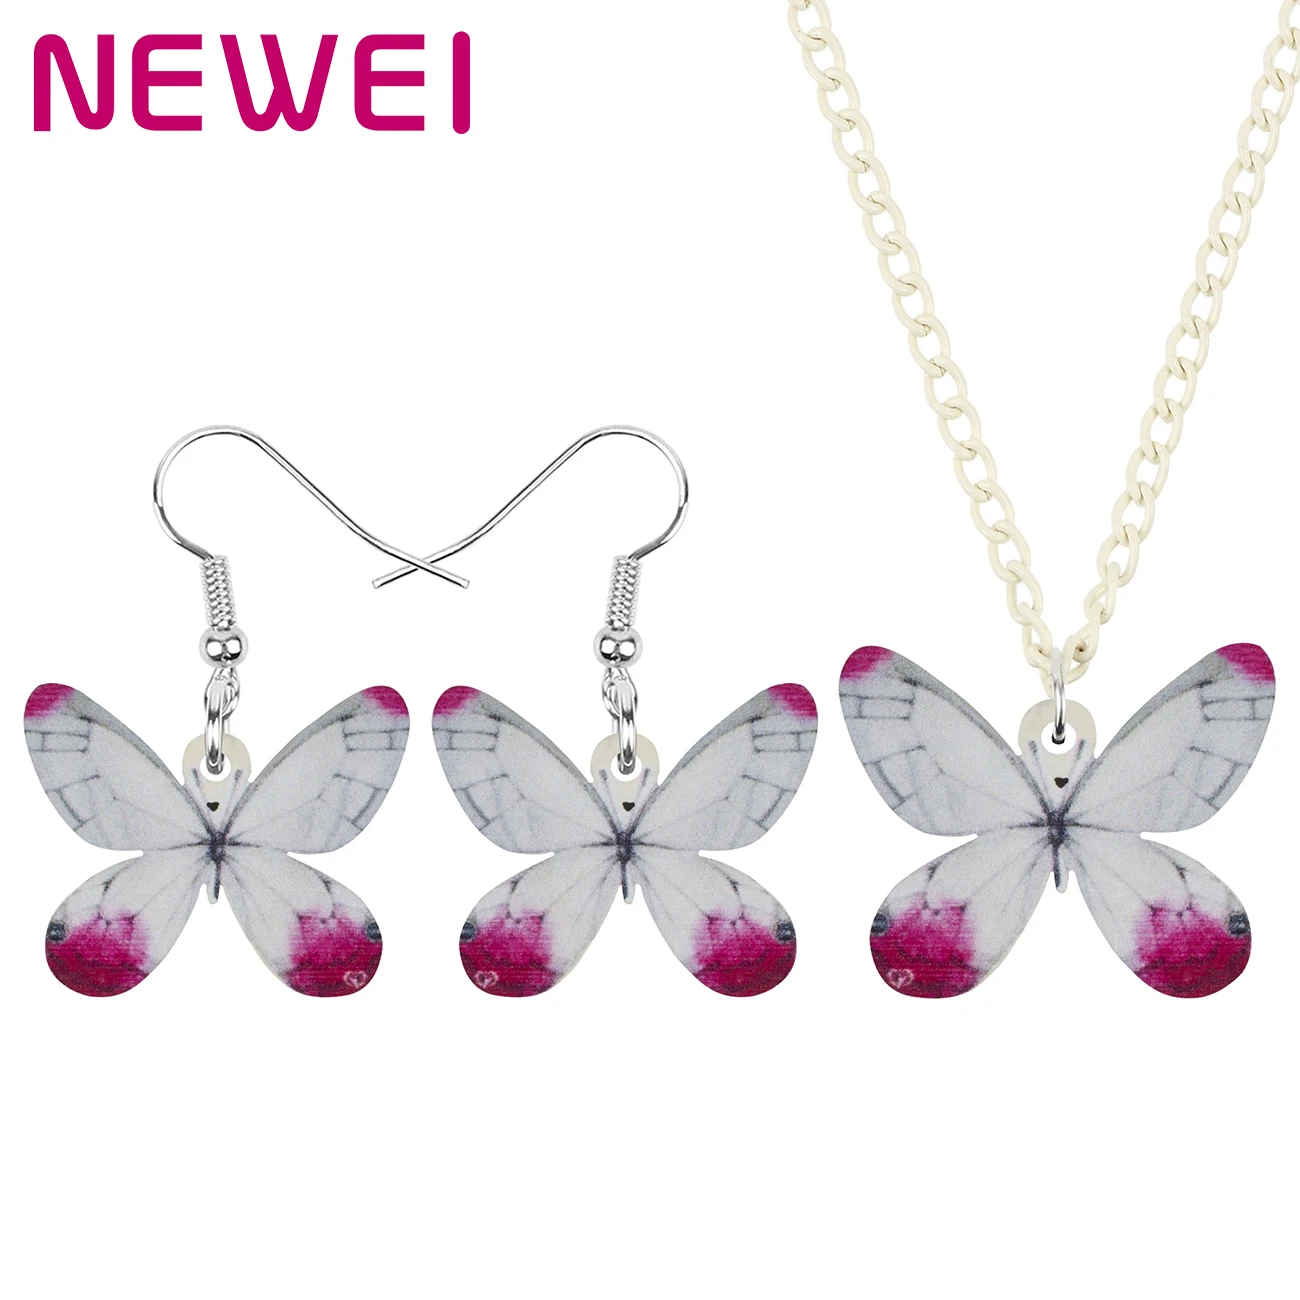 

Newei Acrylic Lovely White-pink Butterfly Jewelry Sets Cute Animal Insect Necklace Earrings For Women Kid Lover Gifts Decoration